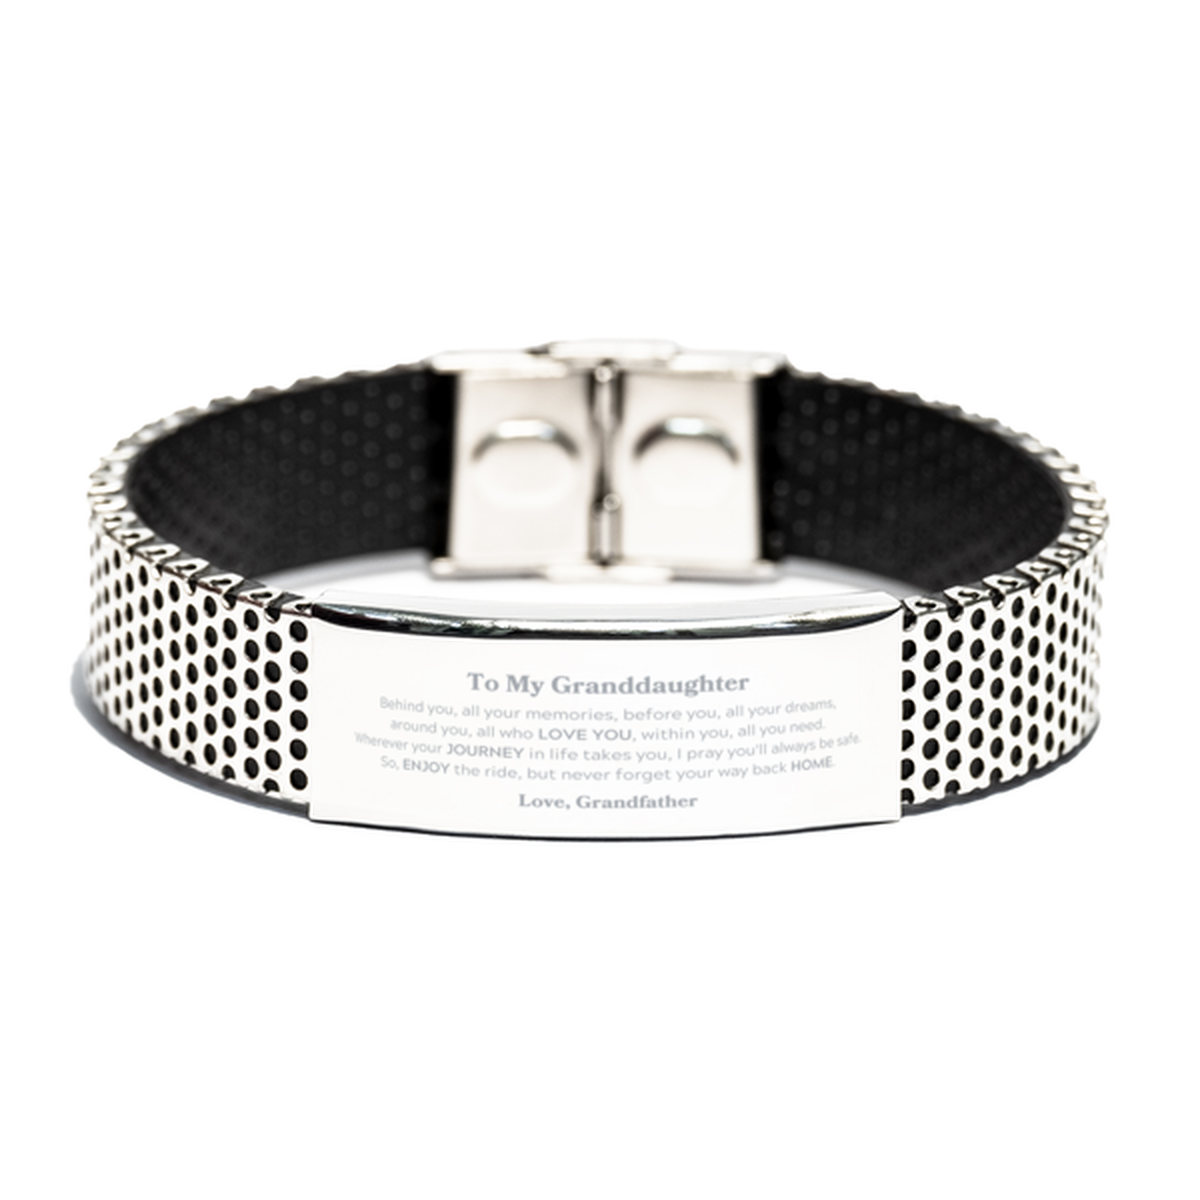 To My Granddaughter Graduation Gifts from Grandfather, Granddaughter Stainless Steel Bracelet Christmas Birthday Gifts for Granddaughter Behind you, all your memories, before you, all your dreams. Love, Grandfather